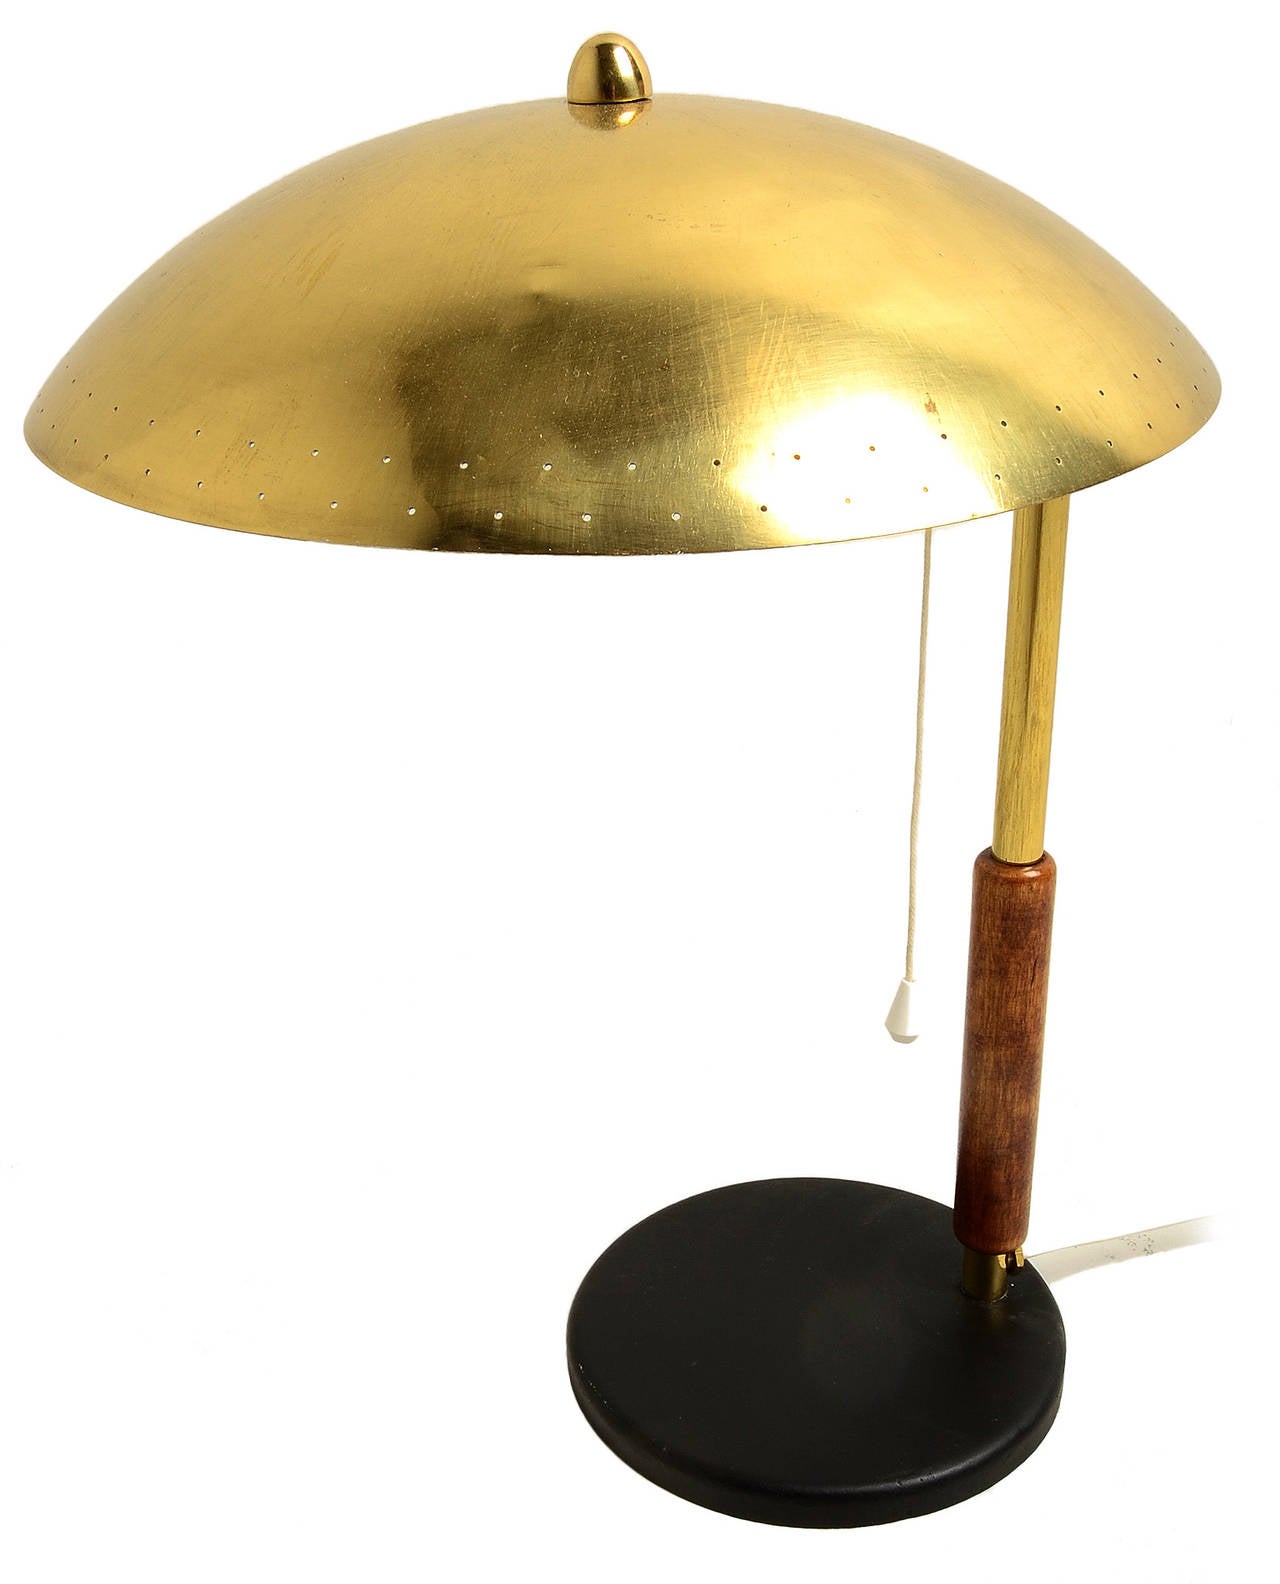 A sophisticated little table lamp by Paavo Tynell for Taito Oy, circa 1950.
A terrific example of Tynell's classic brass shaded works.